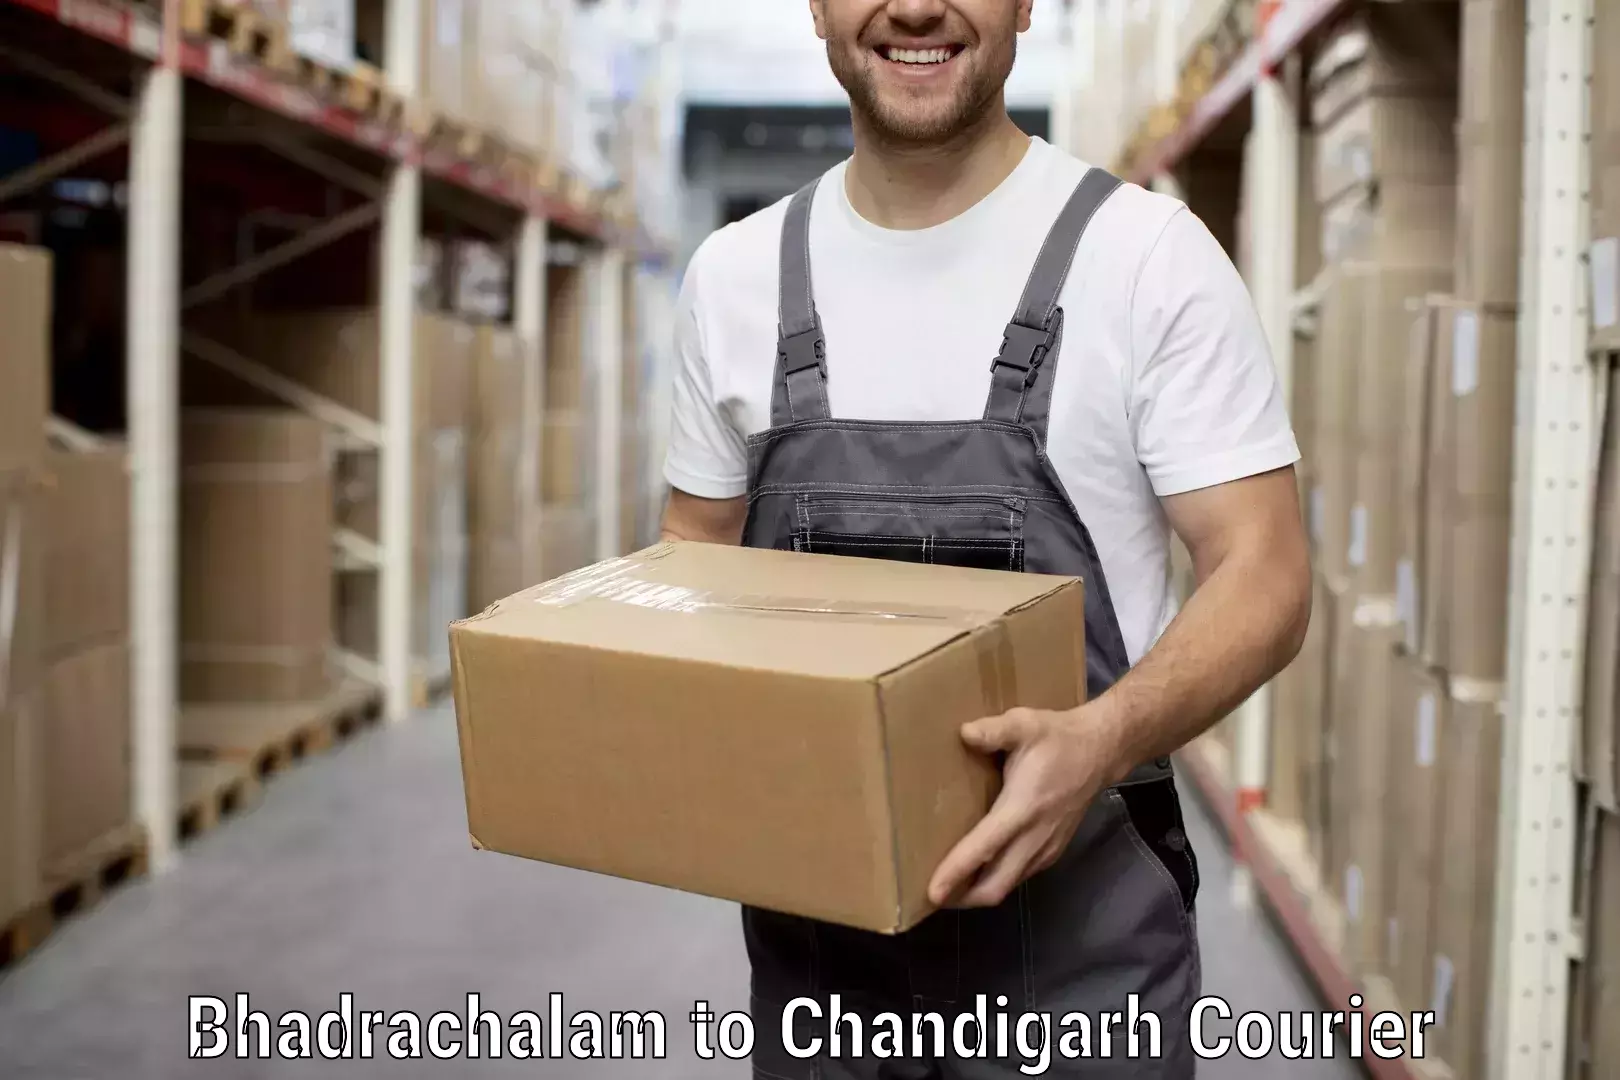 Professional moving assistance Bhadrachalam to Chandigarh